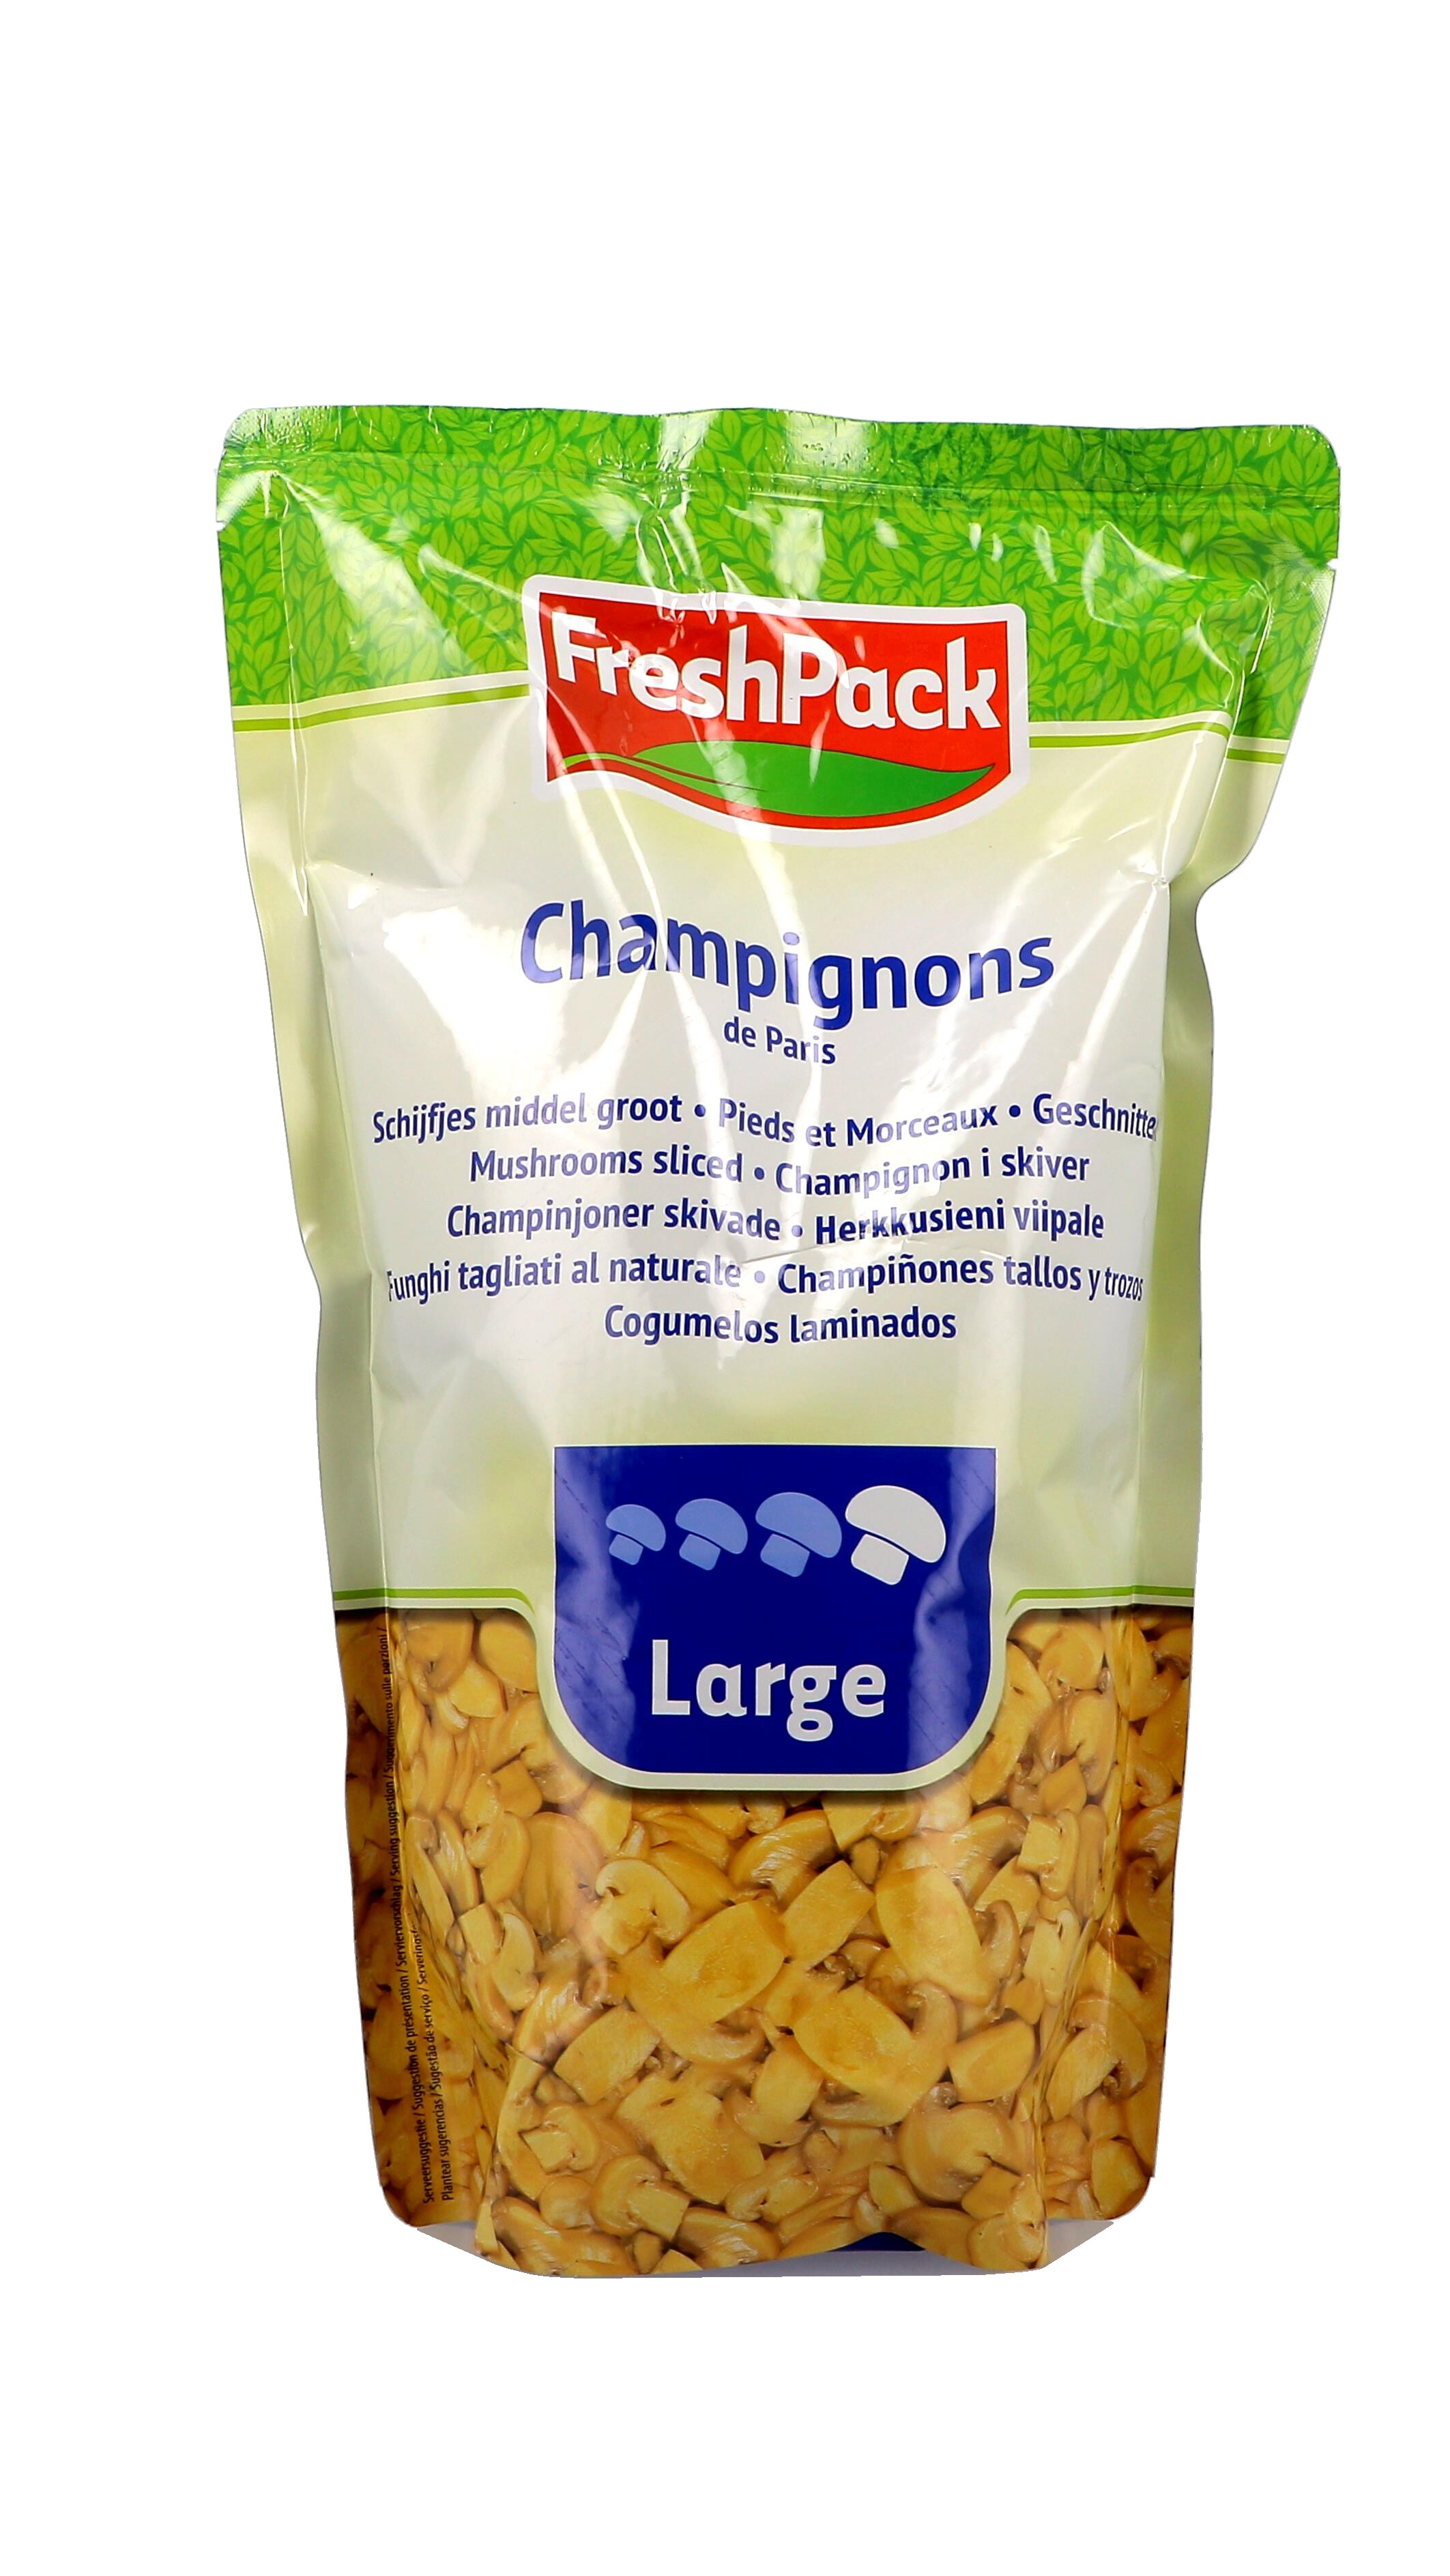 Lutece Mushrooms sliced Large 6x2460gr Smart Pack pouch